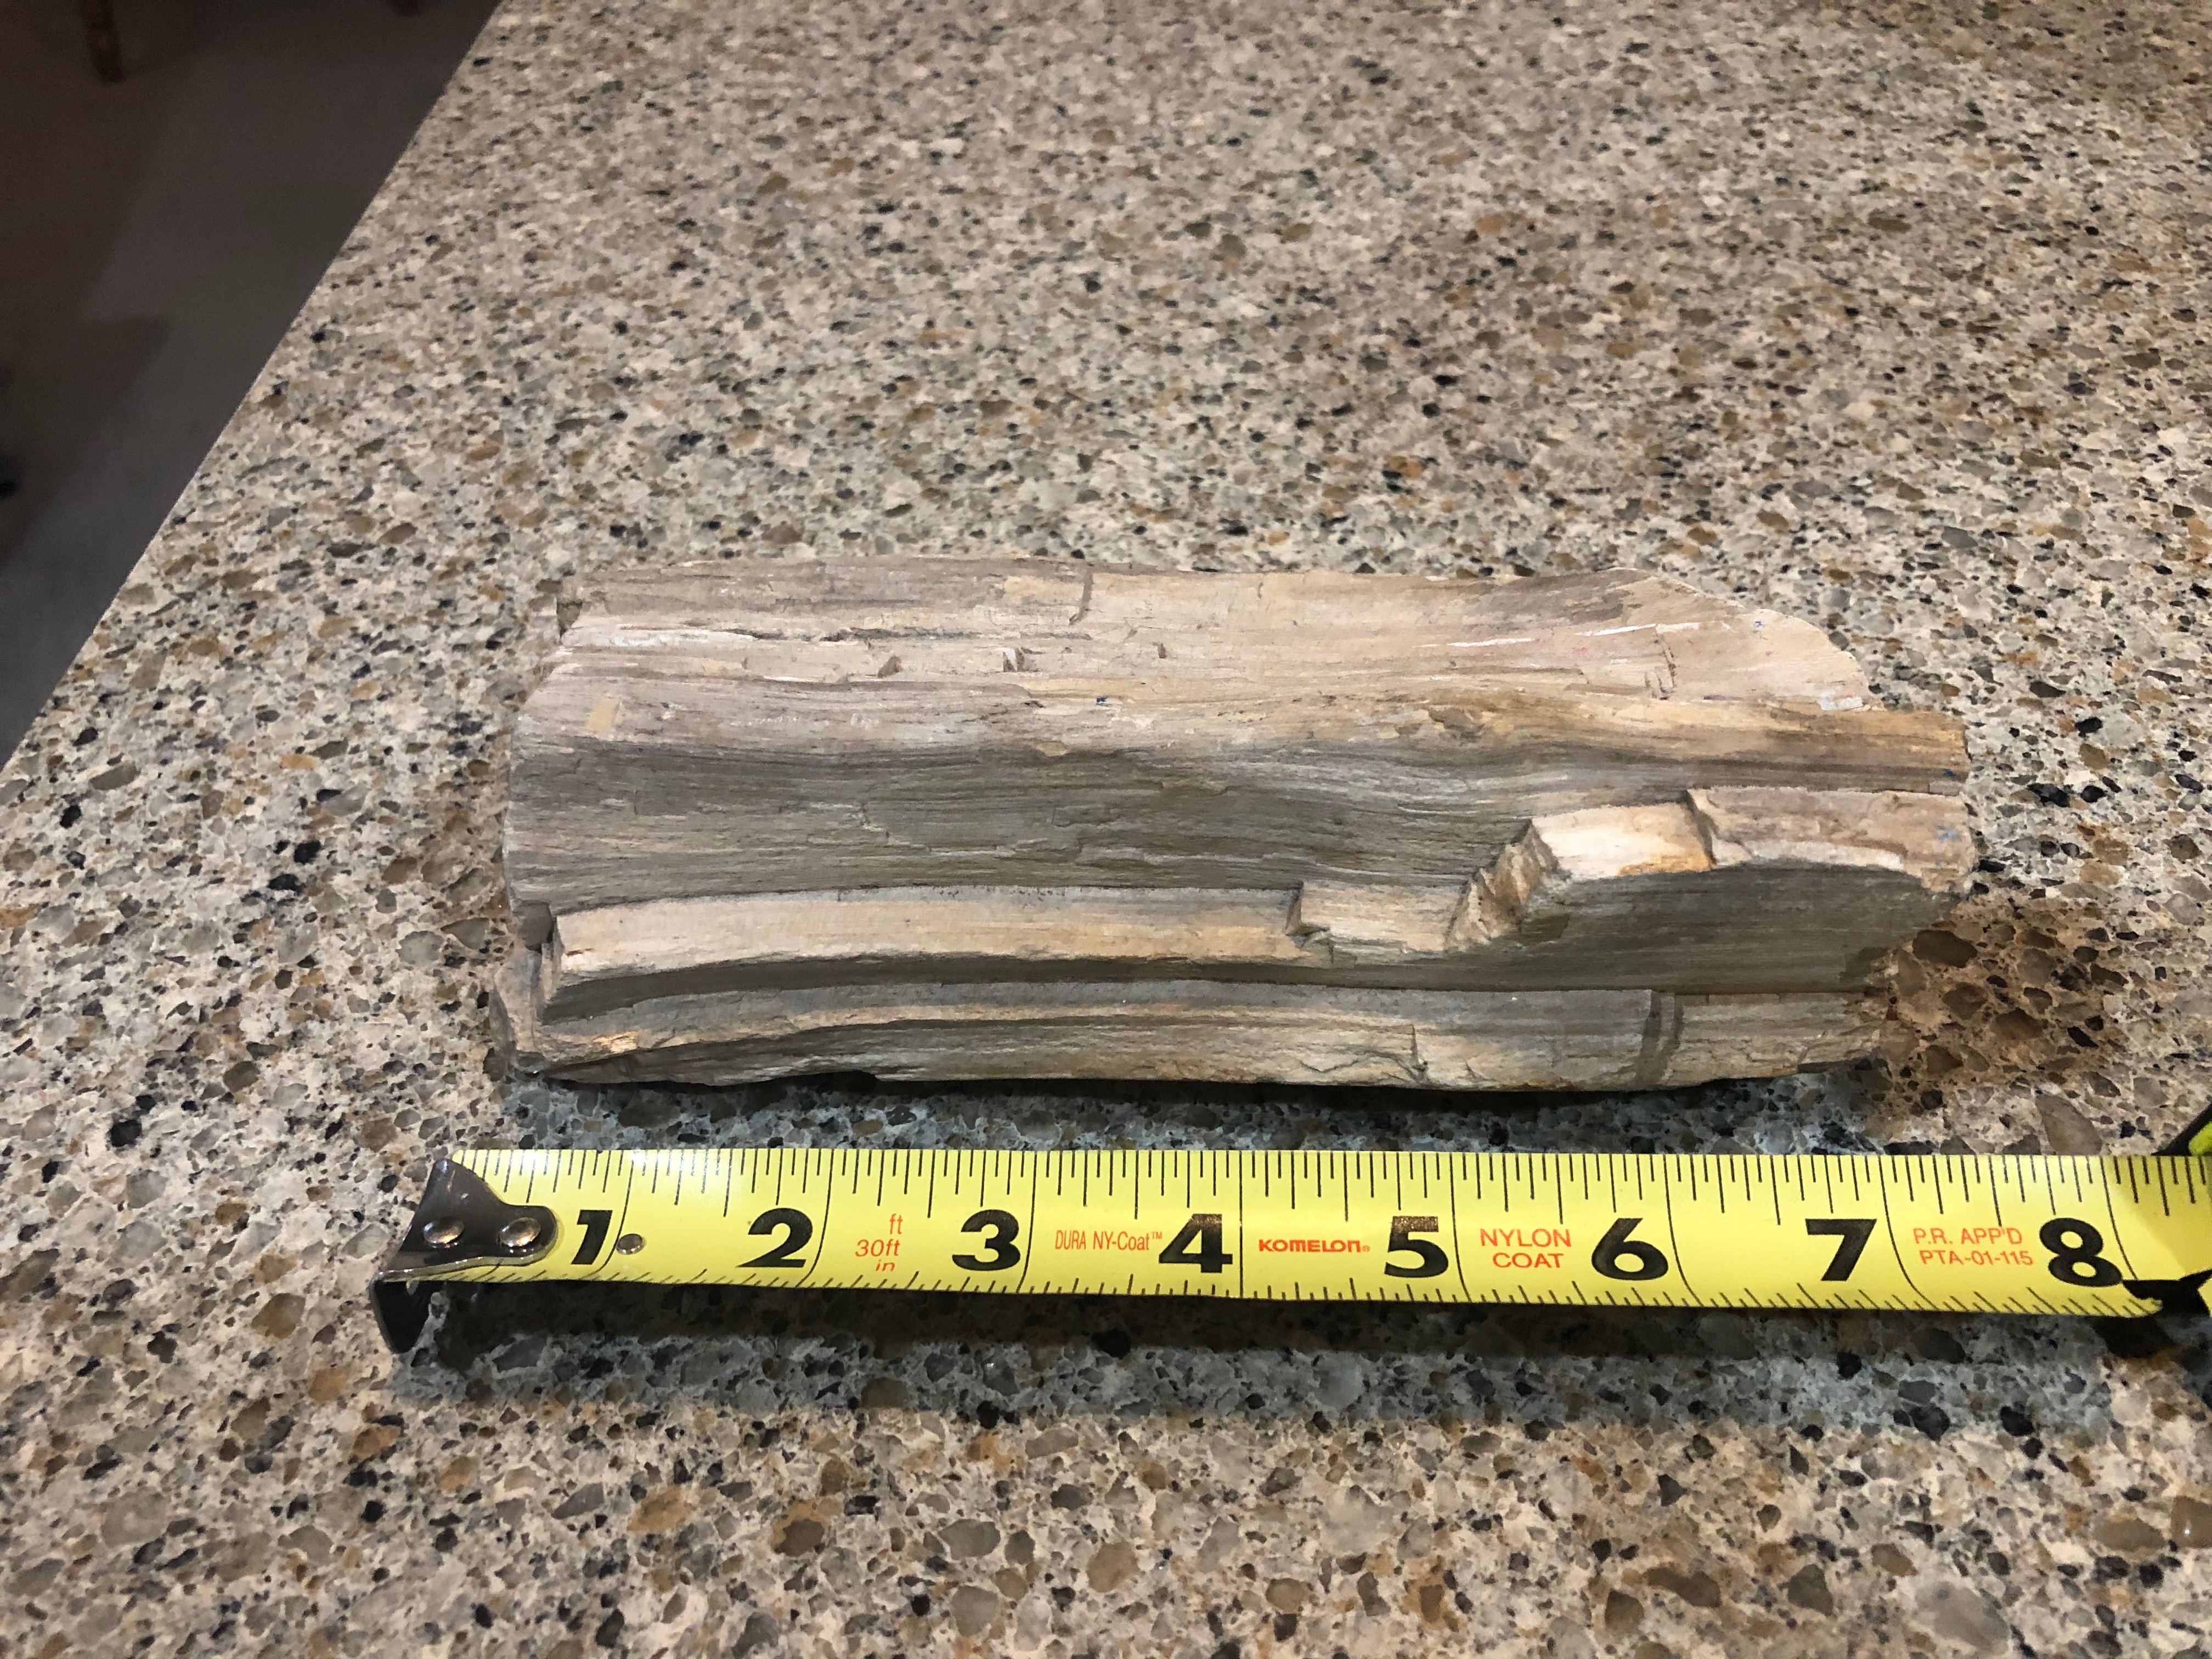 Petrified Wood found in Channelview